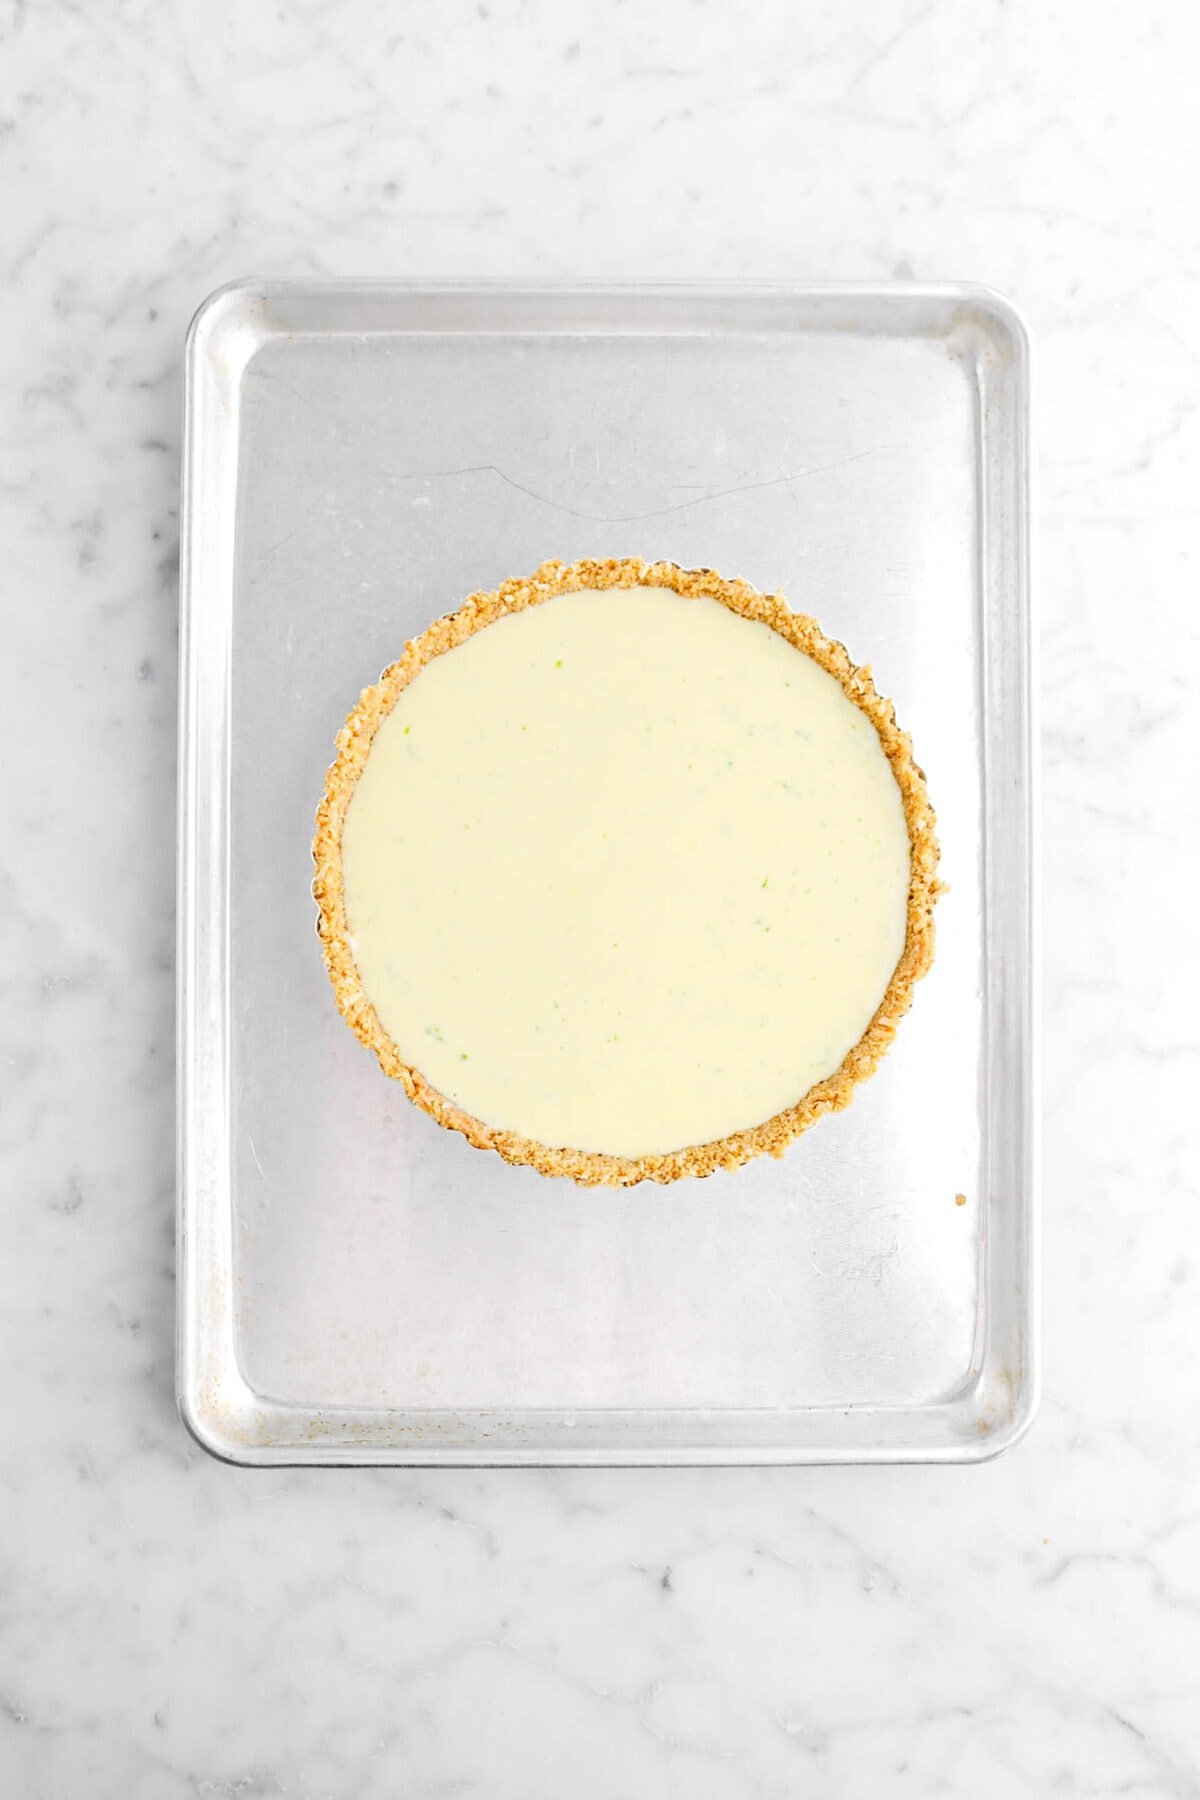 unbaked key lime pie on sheet pan.